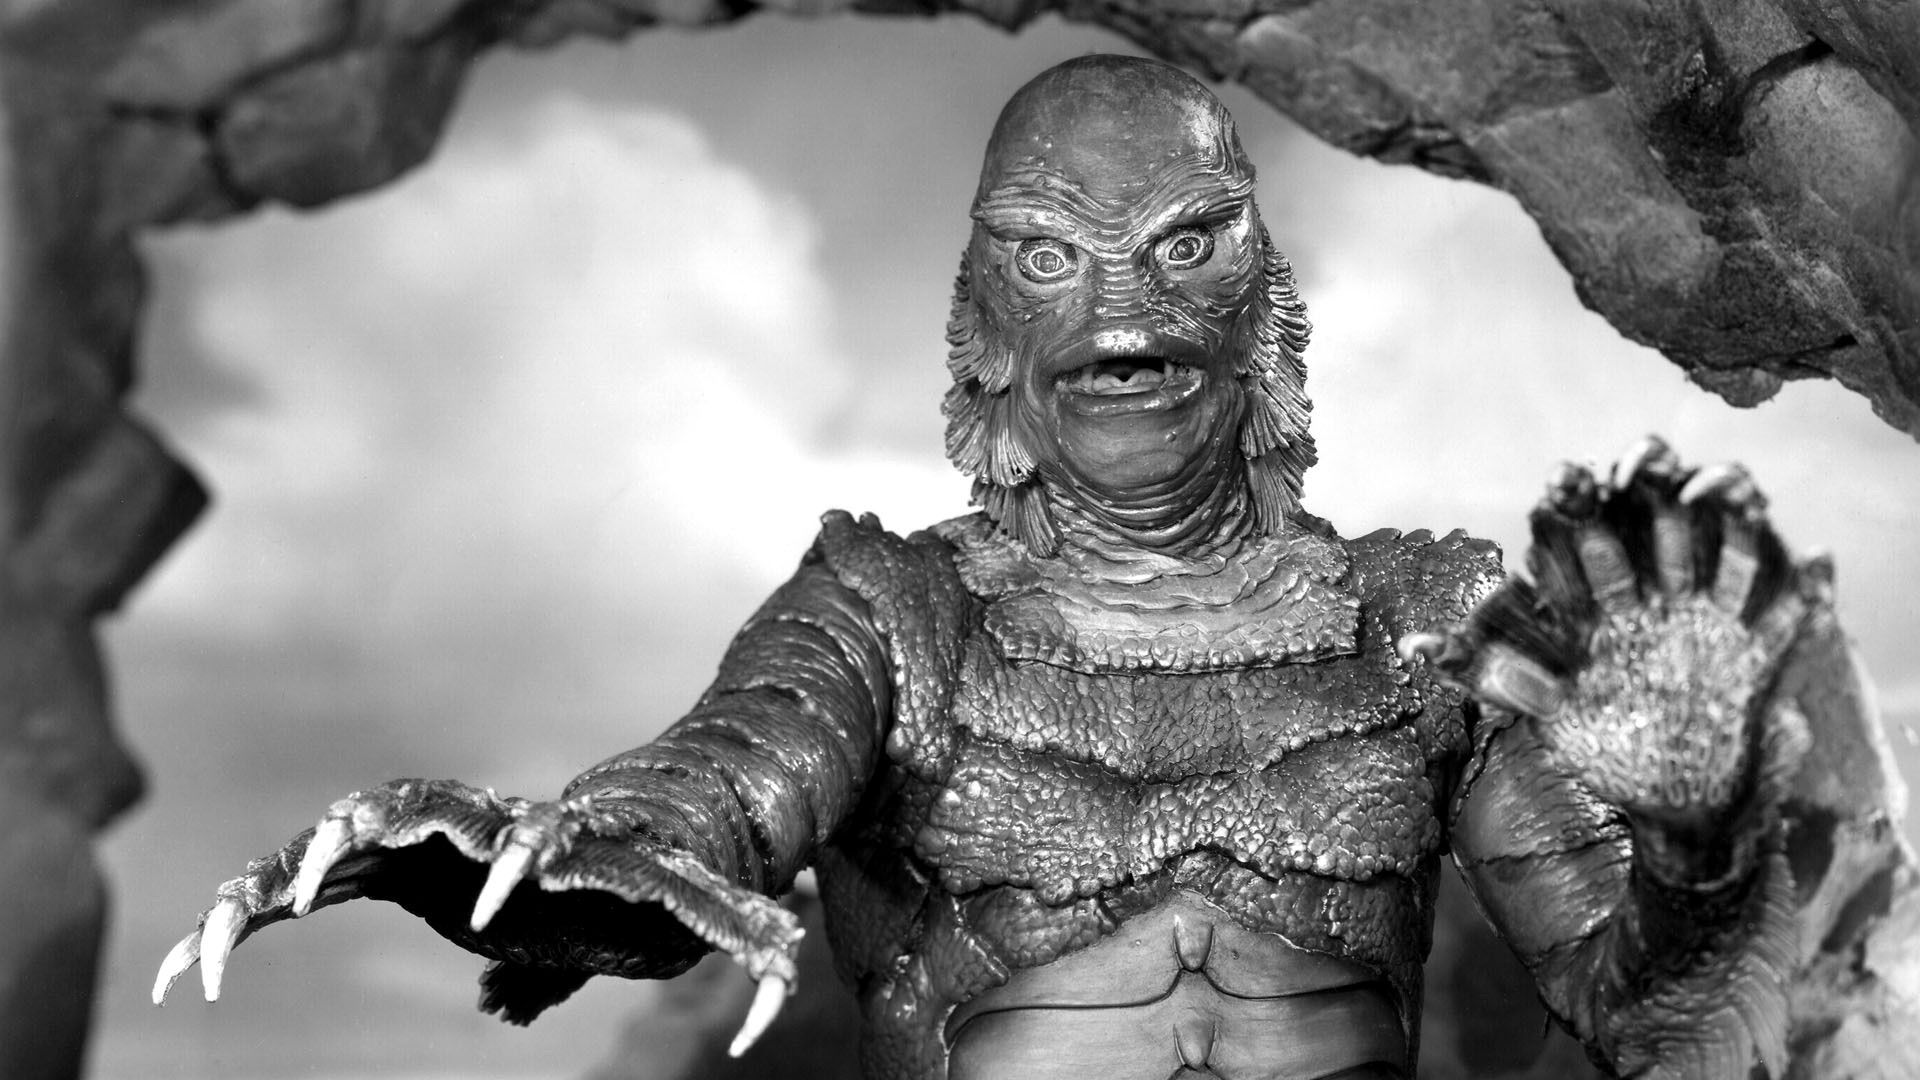 Creature from the Black Lagoon Backdrop